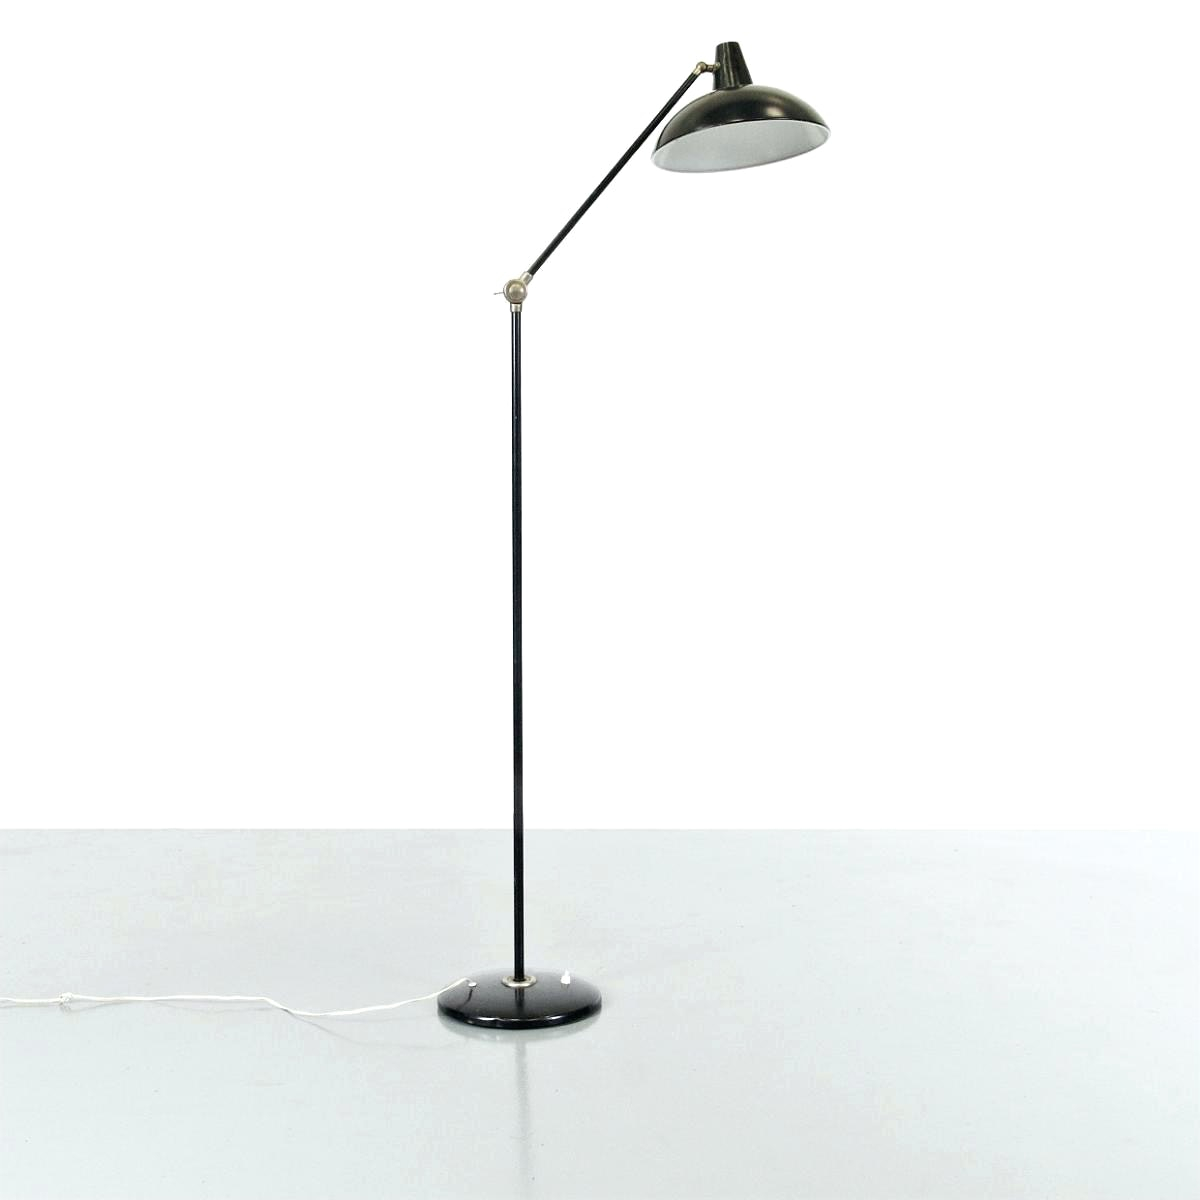 Awesome Simpson 4 Light Floor Lamp And Design Classic within size 1200 X 1200